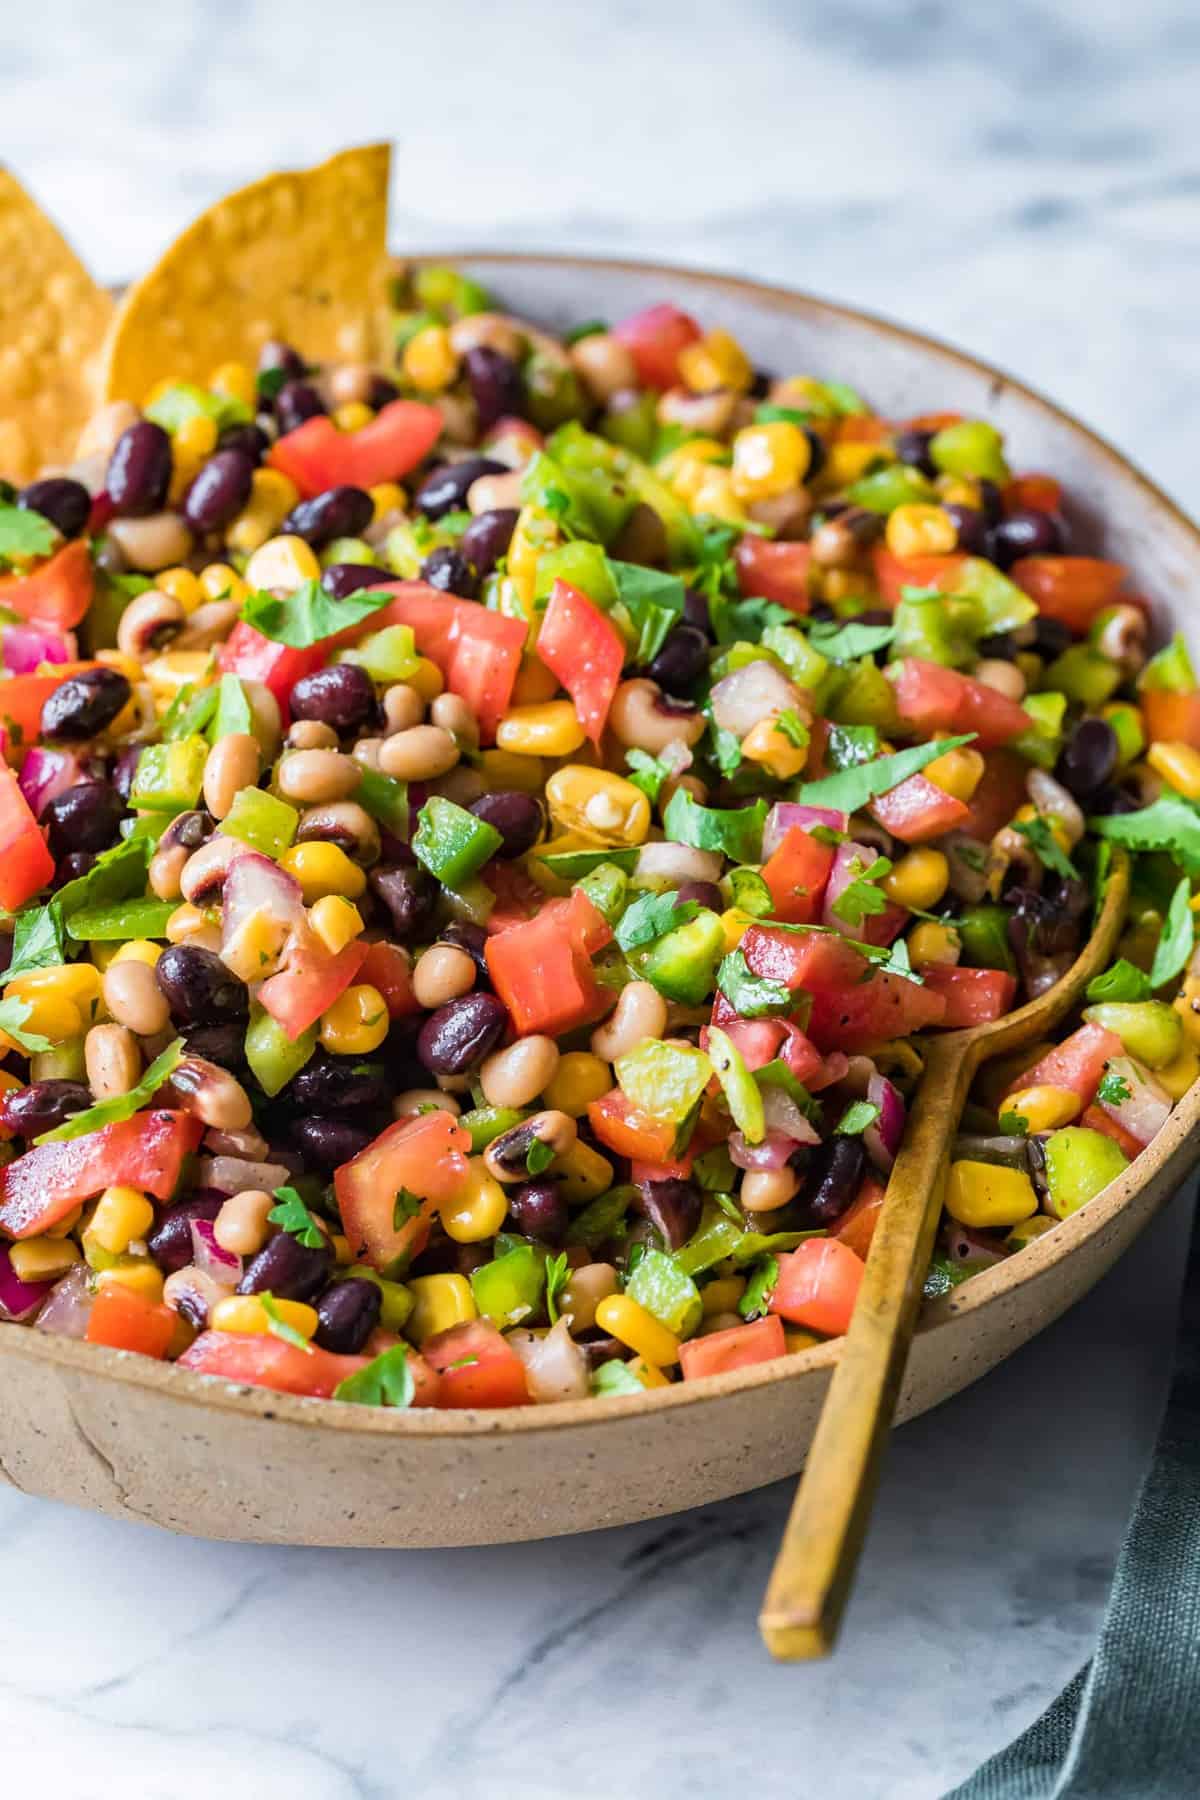 Cowboy caviar in a large bowl ready to serve